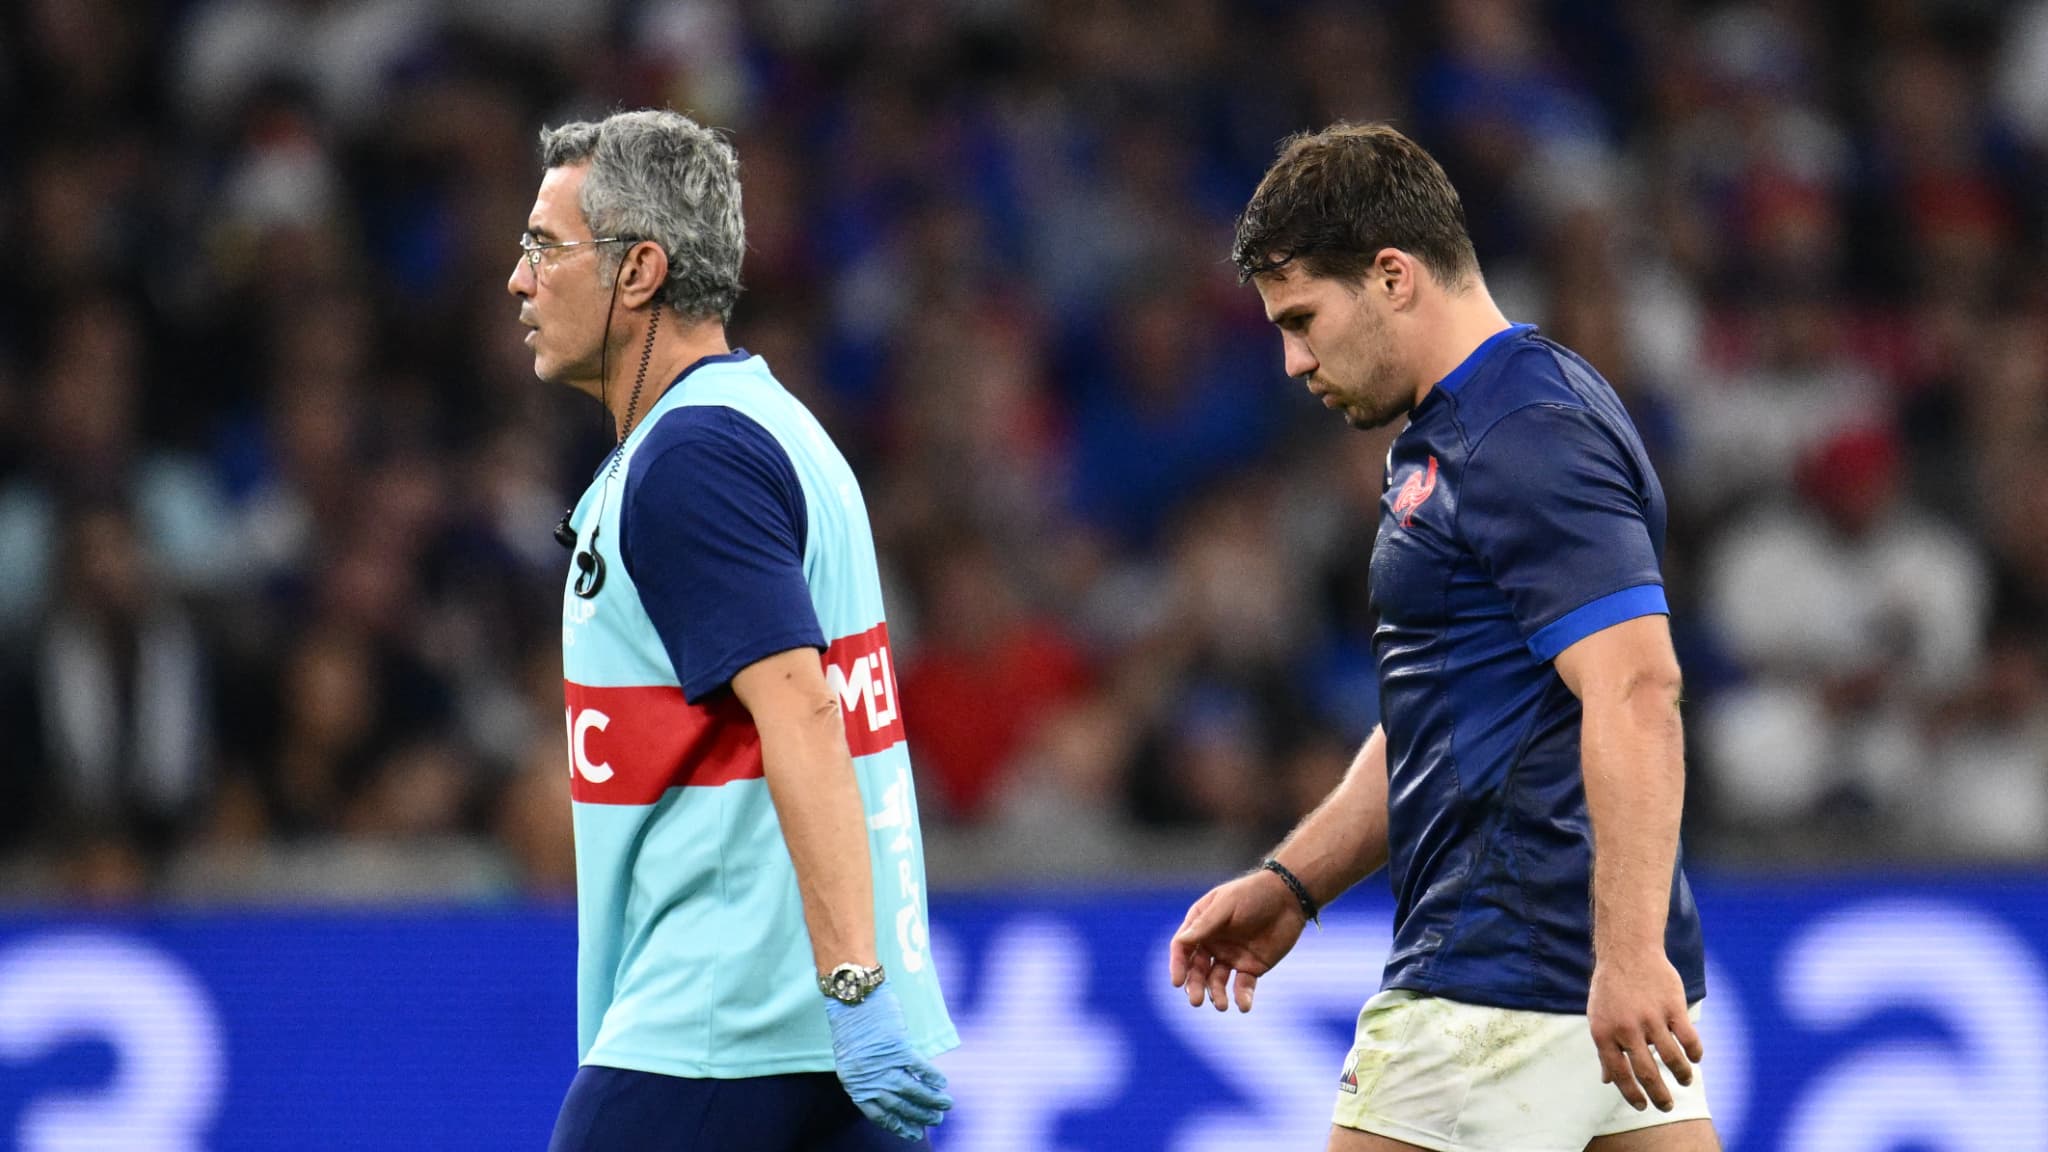 LIVE – Rugby World Cup: ‘Risk of further injuries during match’, former NRL medical panel president warns